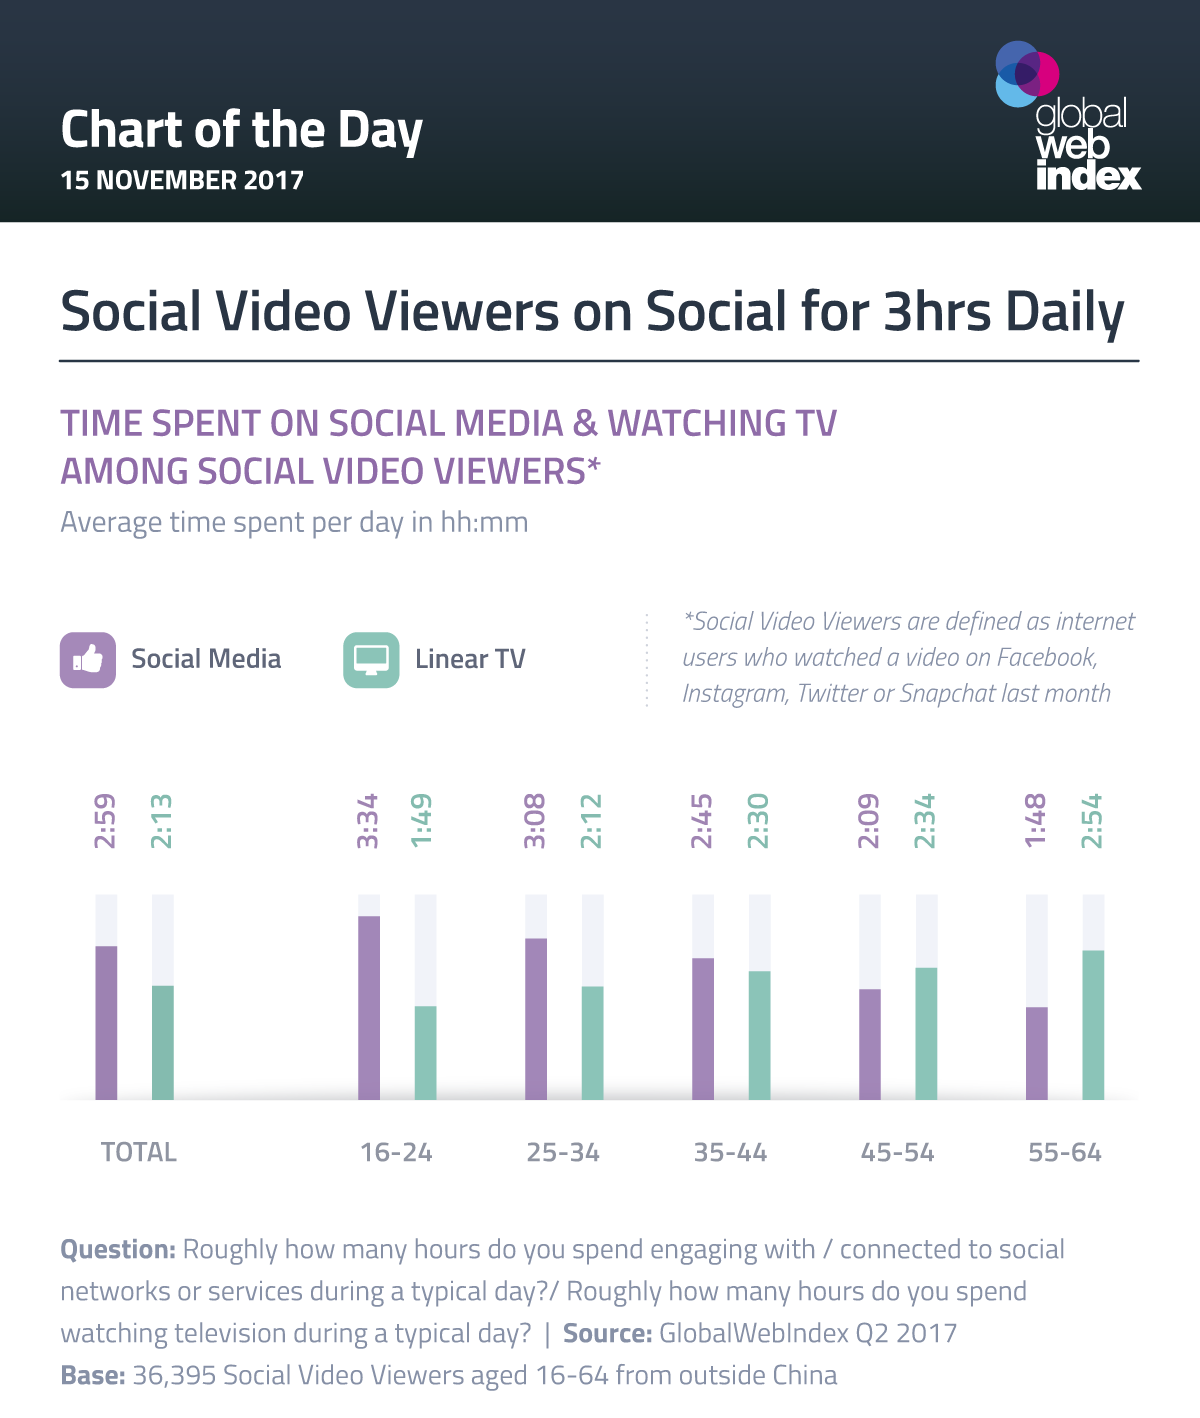 Chart of the day: Video Consumers on Social Media for 3 Hours Daily